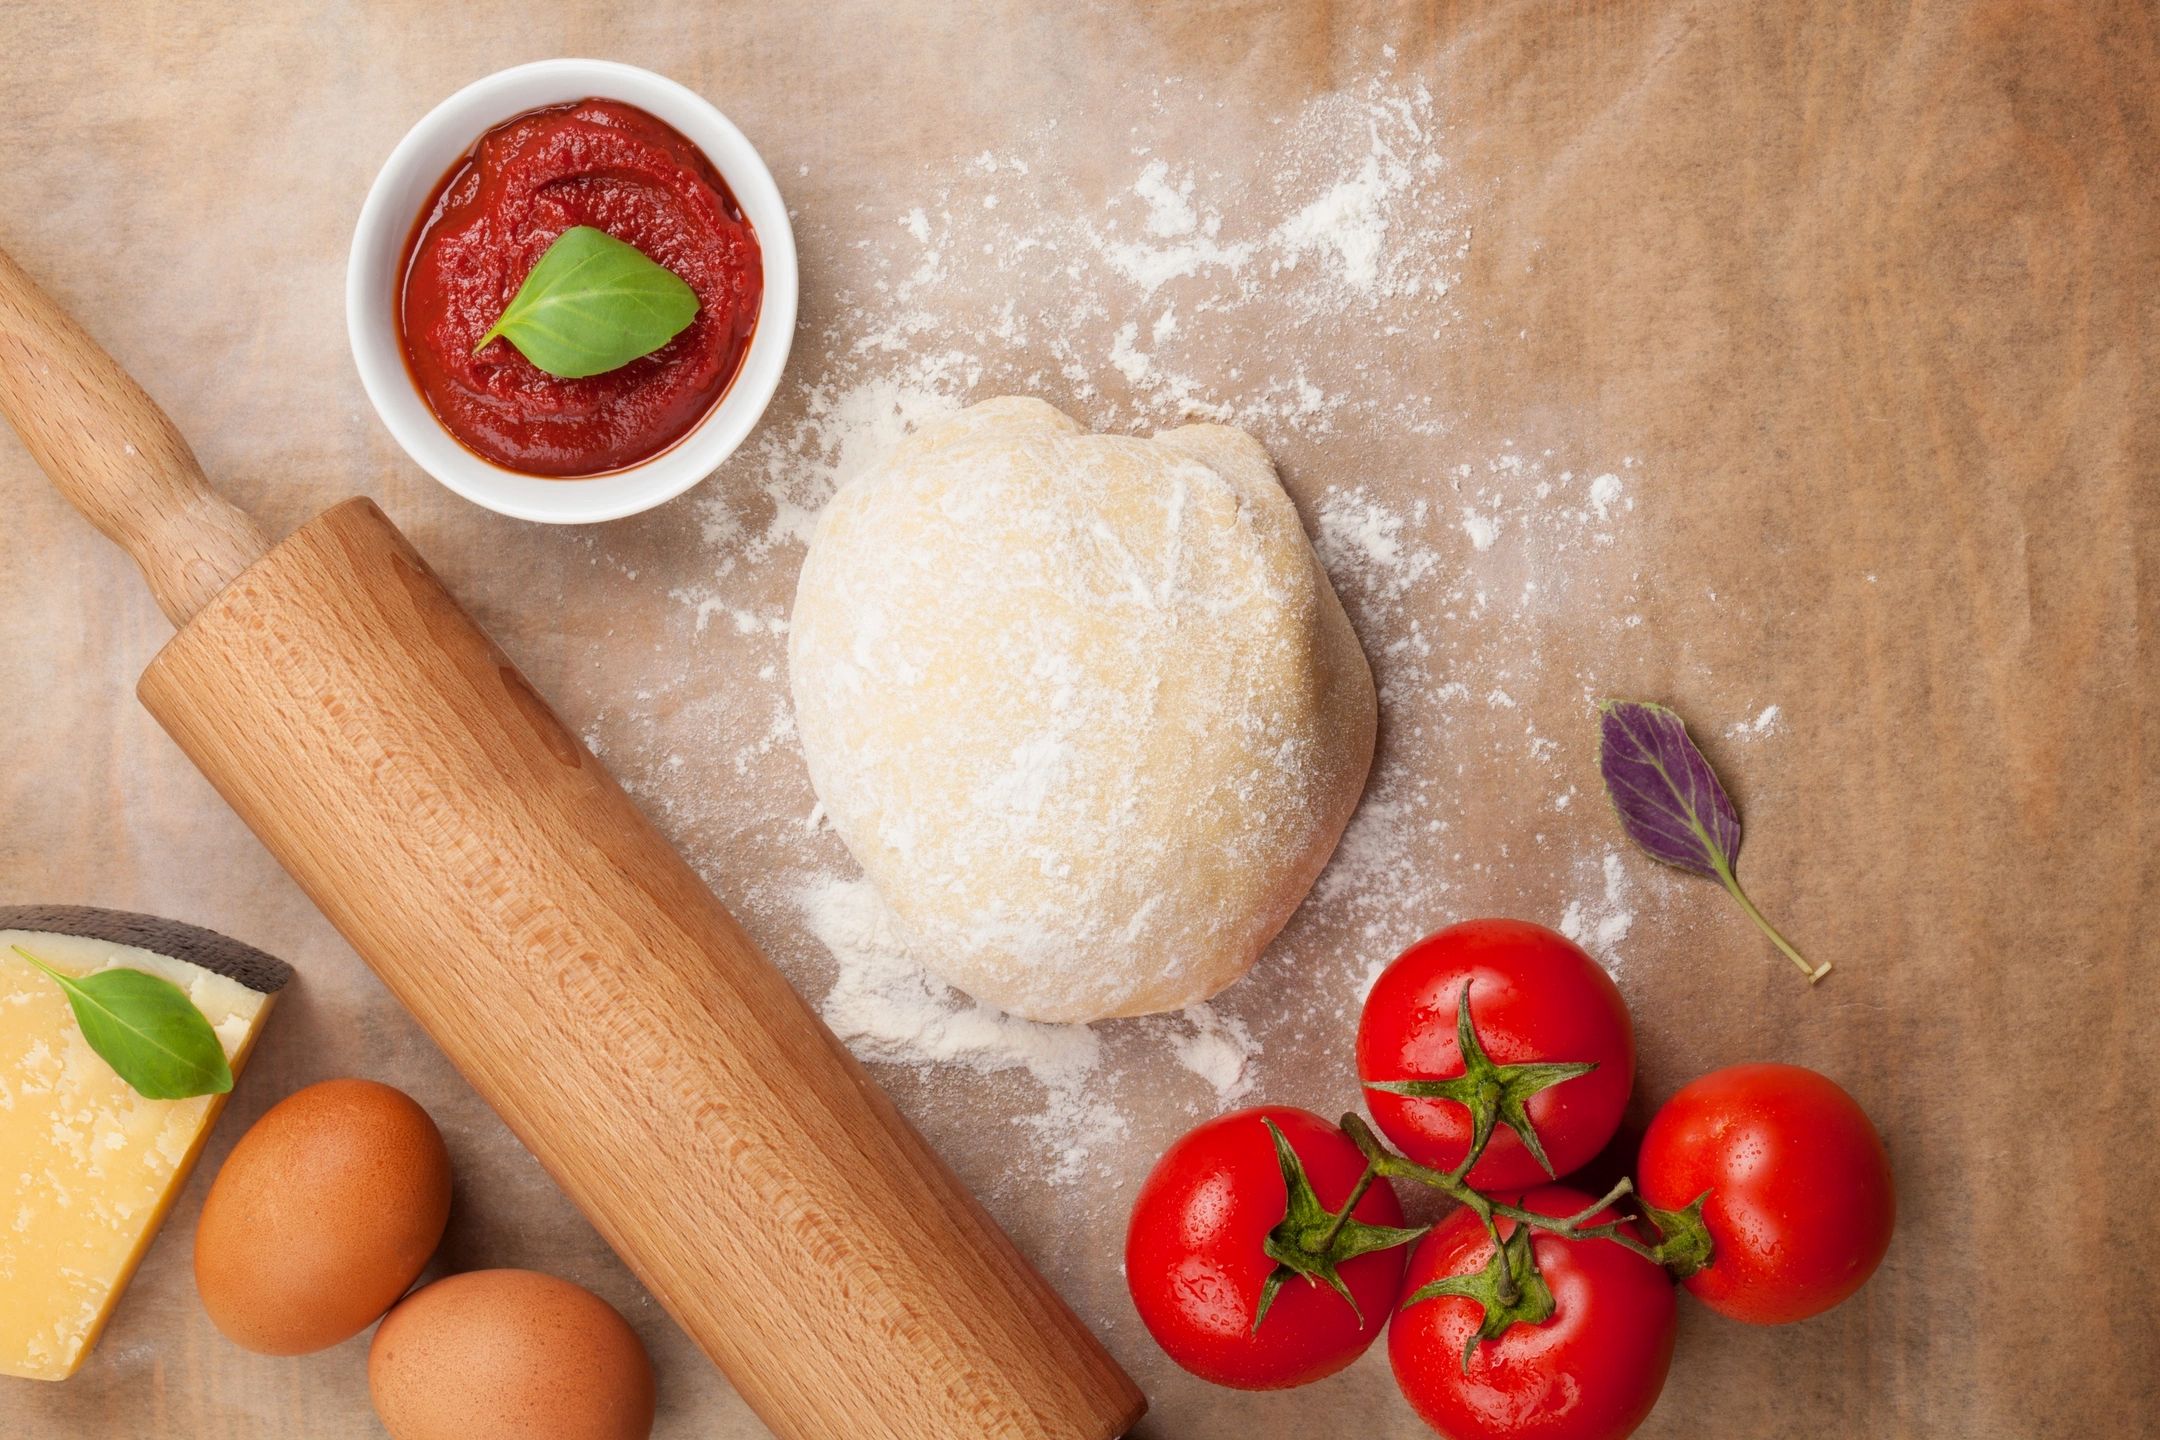 It all starts with the finest ingredients. Dough & sauce made fresh daily. 